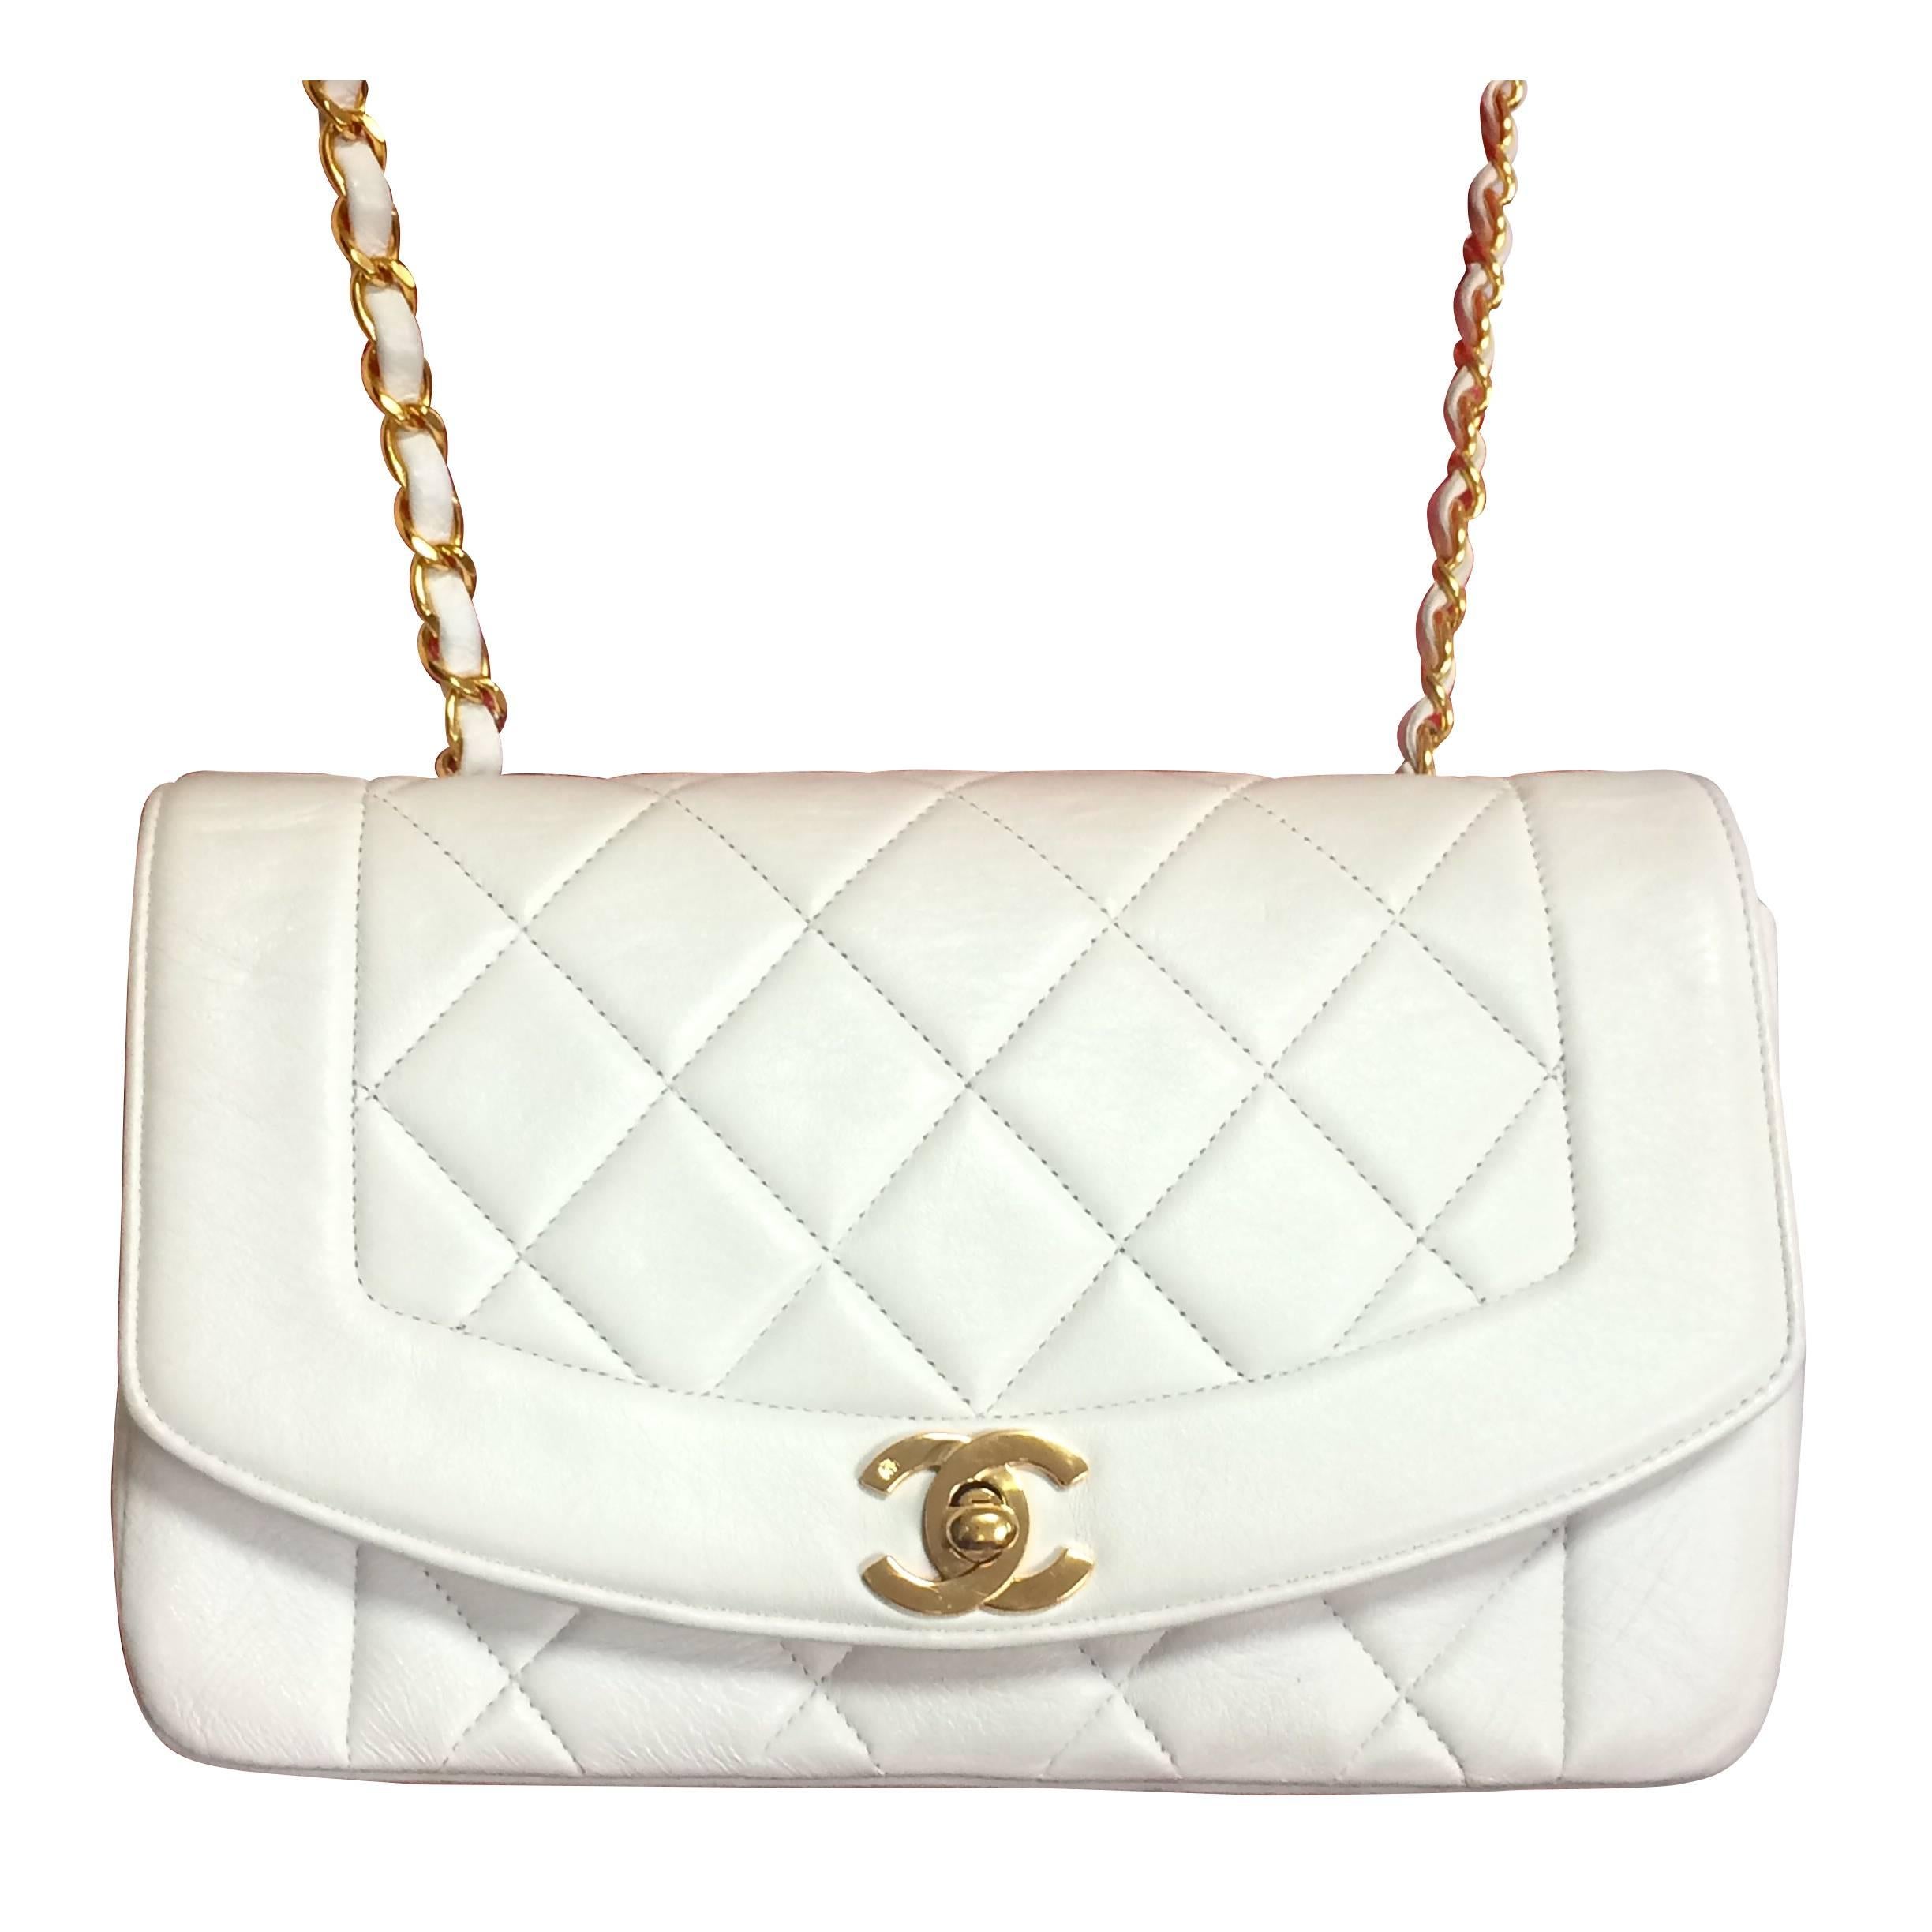 Vintage Chanel classic 2.55 white color lamb leather shoulder bag with gold CC.